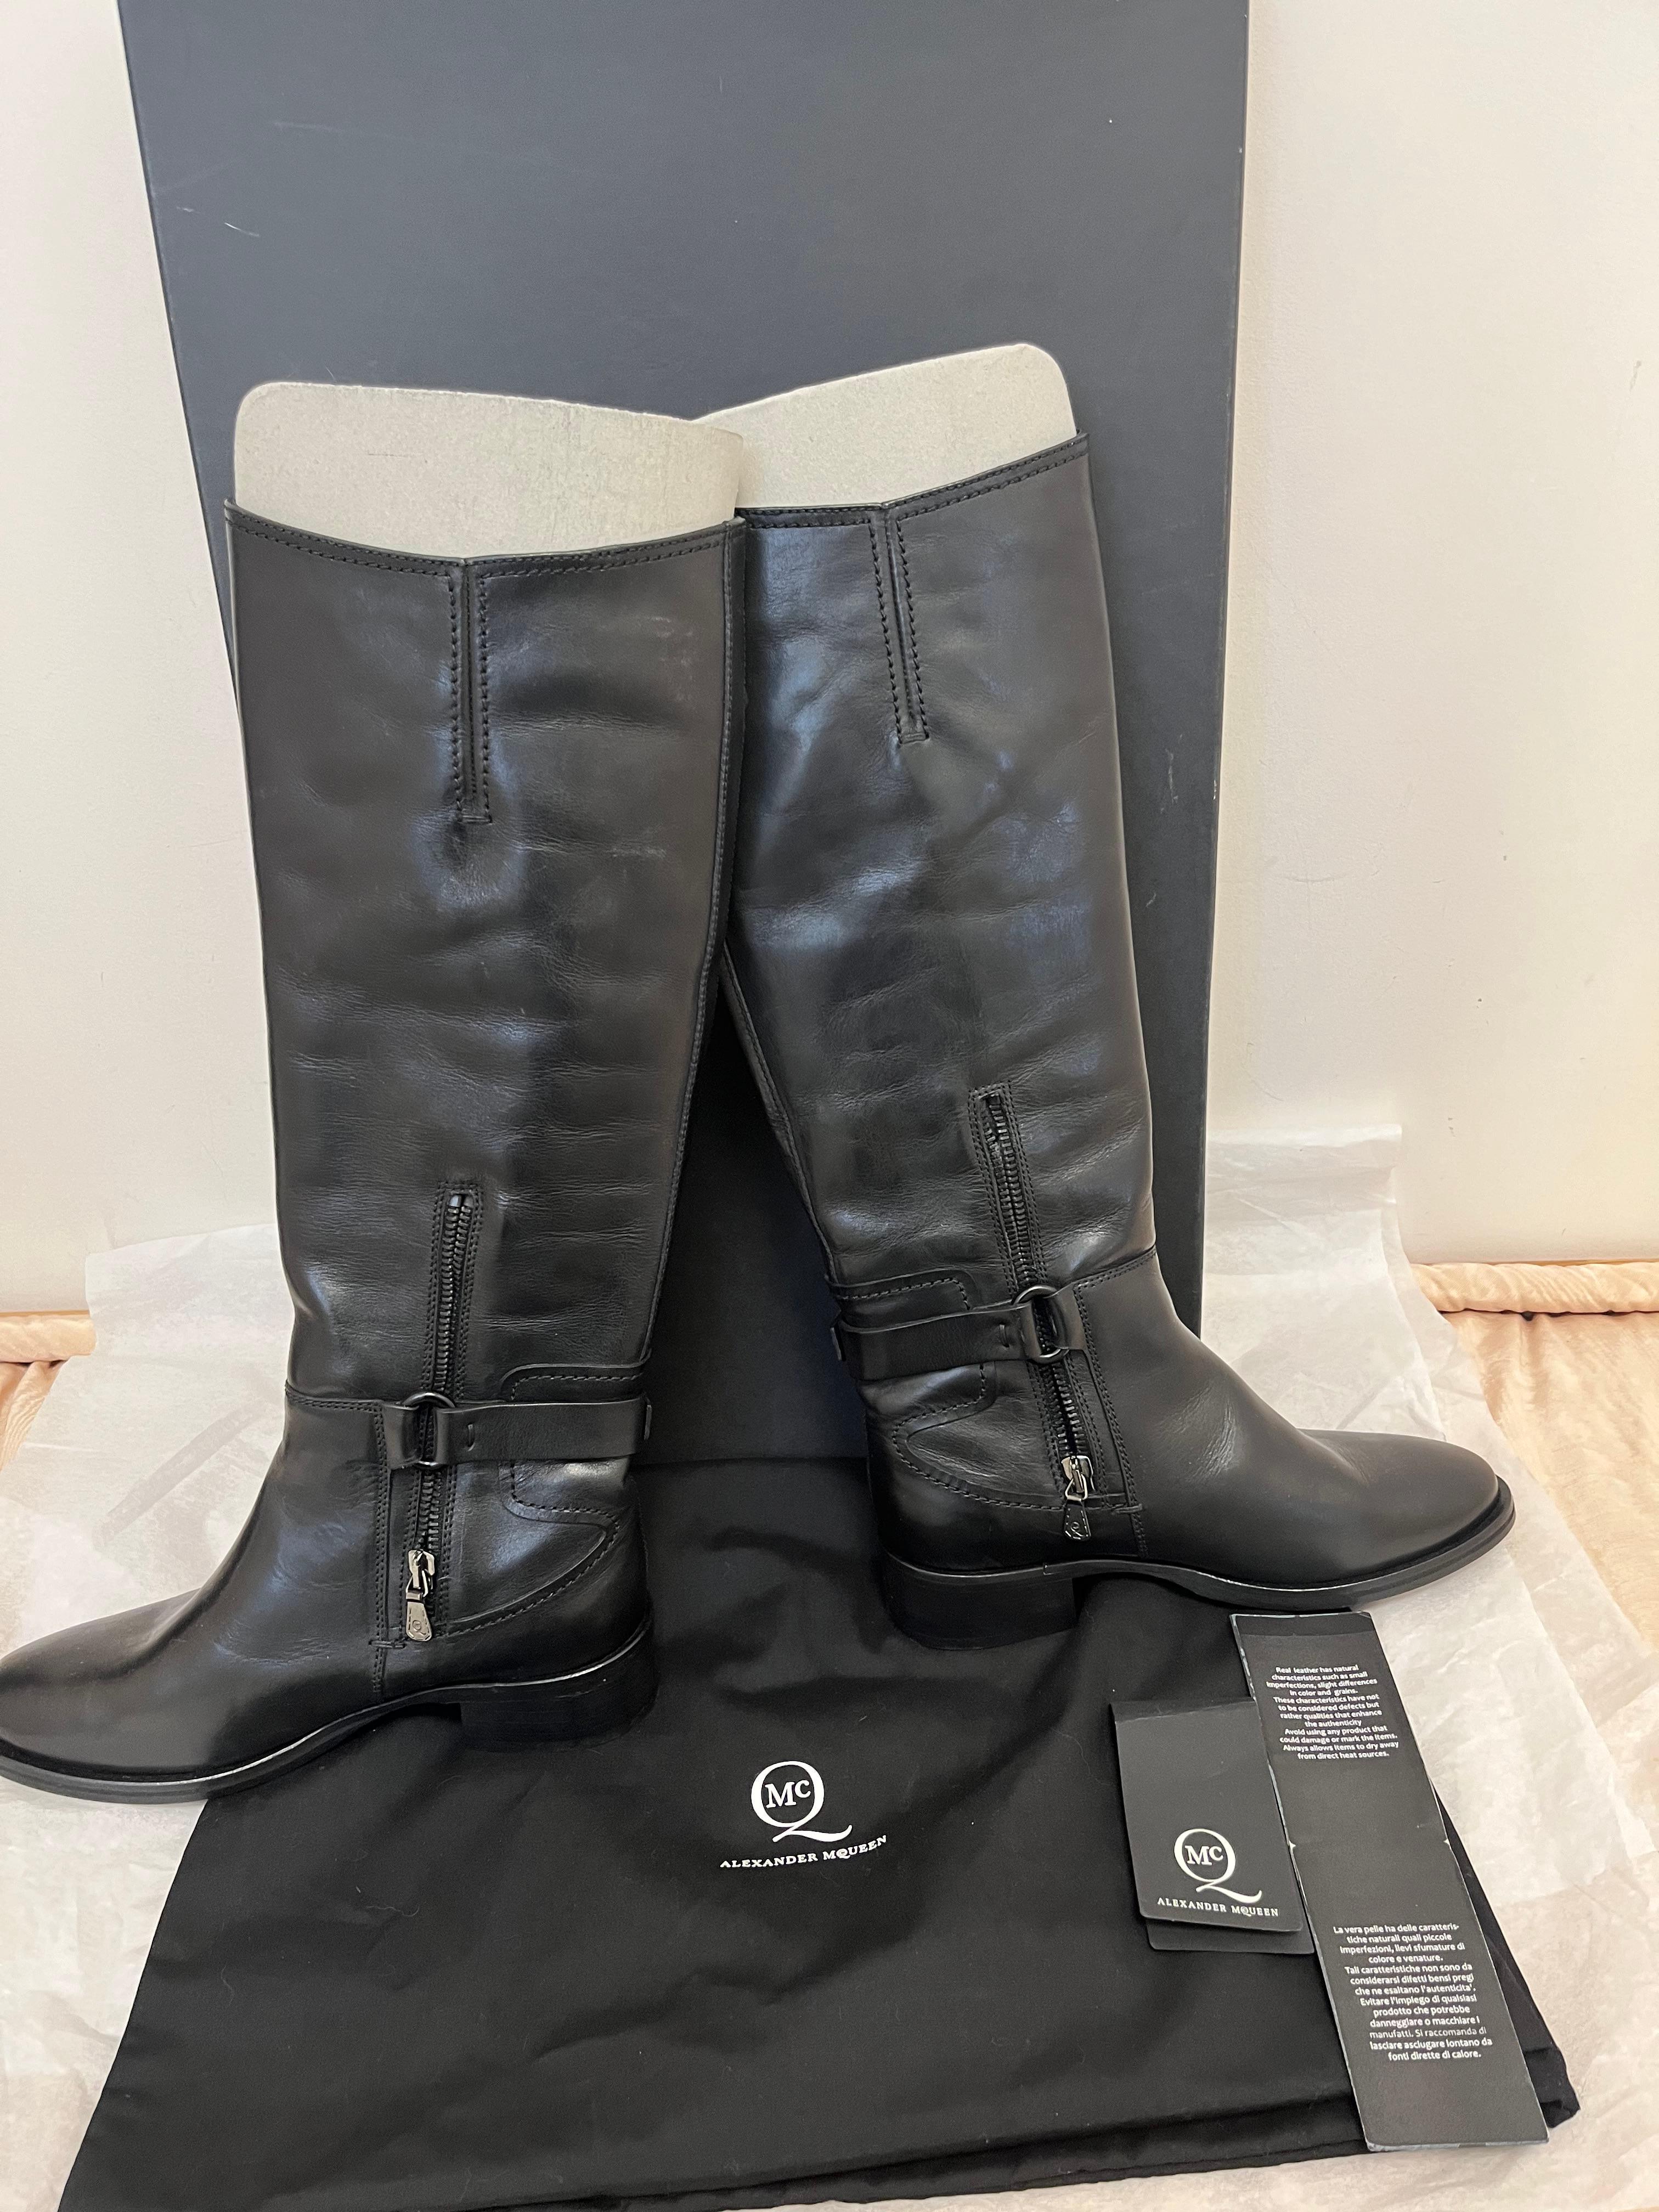 Alexander McQueen Bridal Riding Boots Size 7 w/Box, Dust Bag and Literature In New Condition In Port Hope, ON